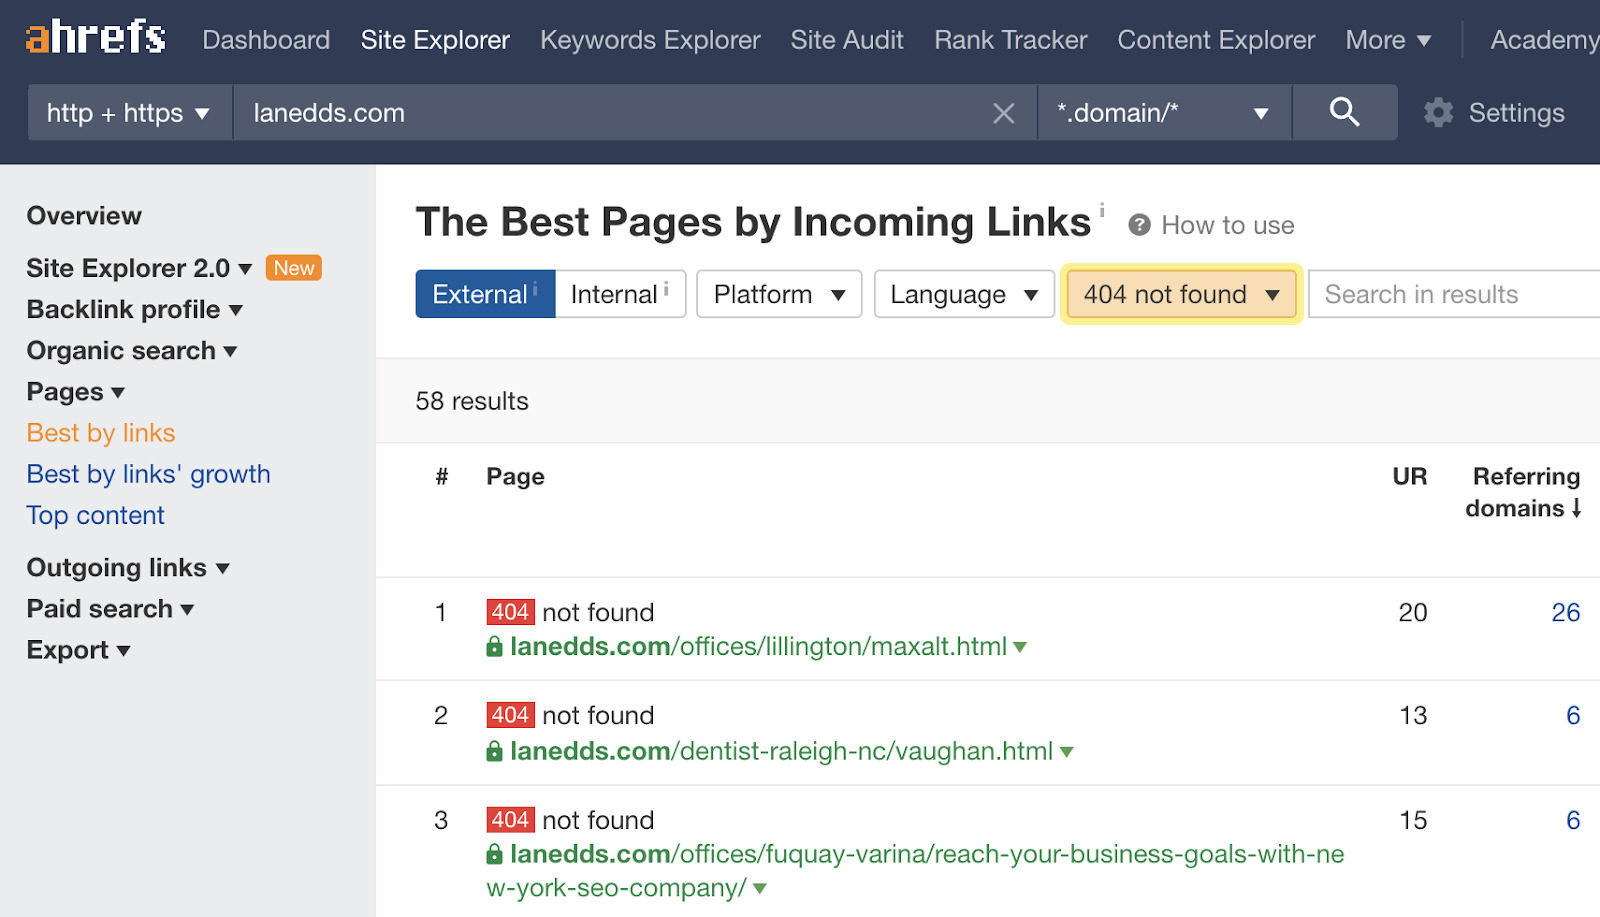 Best by links report filtered to 404 status code to show redirect opportunities